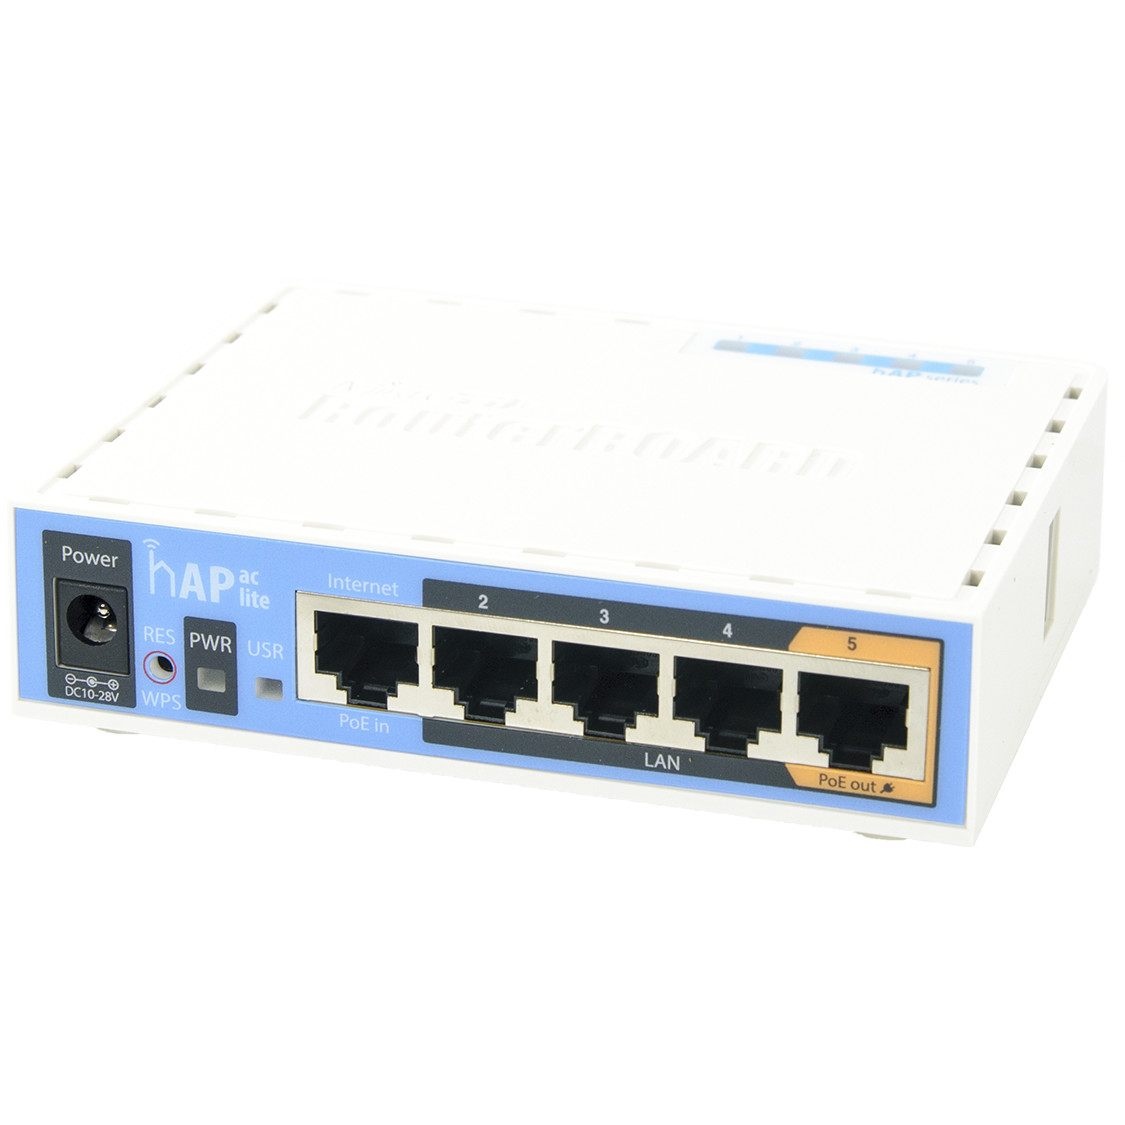 Router wireless Router wireless RB952Ui-5ac2nD, SOHO 2,4GHz 802.11b/g/n 5GHz 802.11a/ac 5x Ethernet